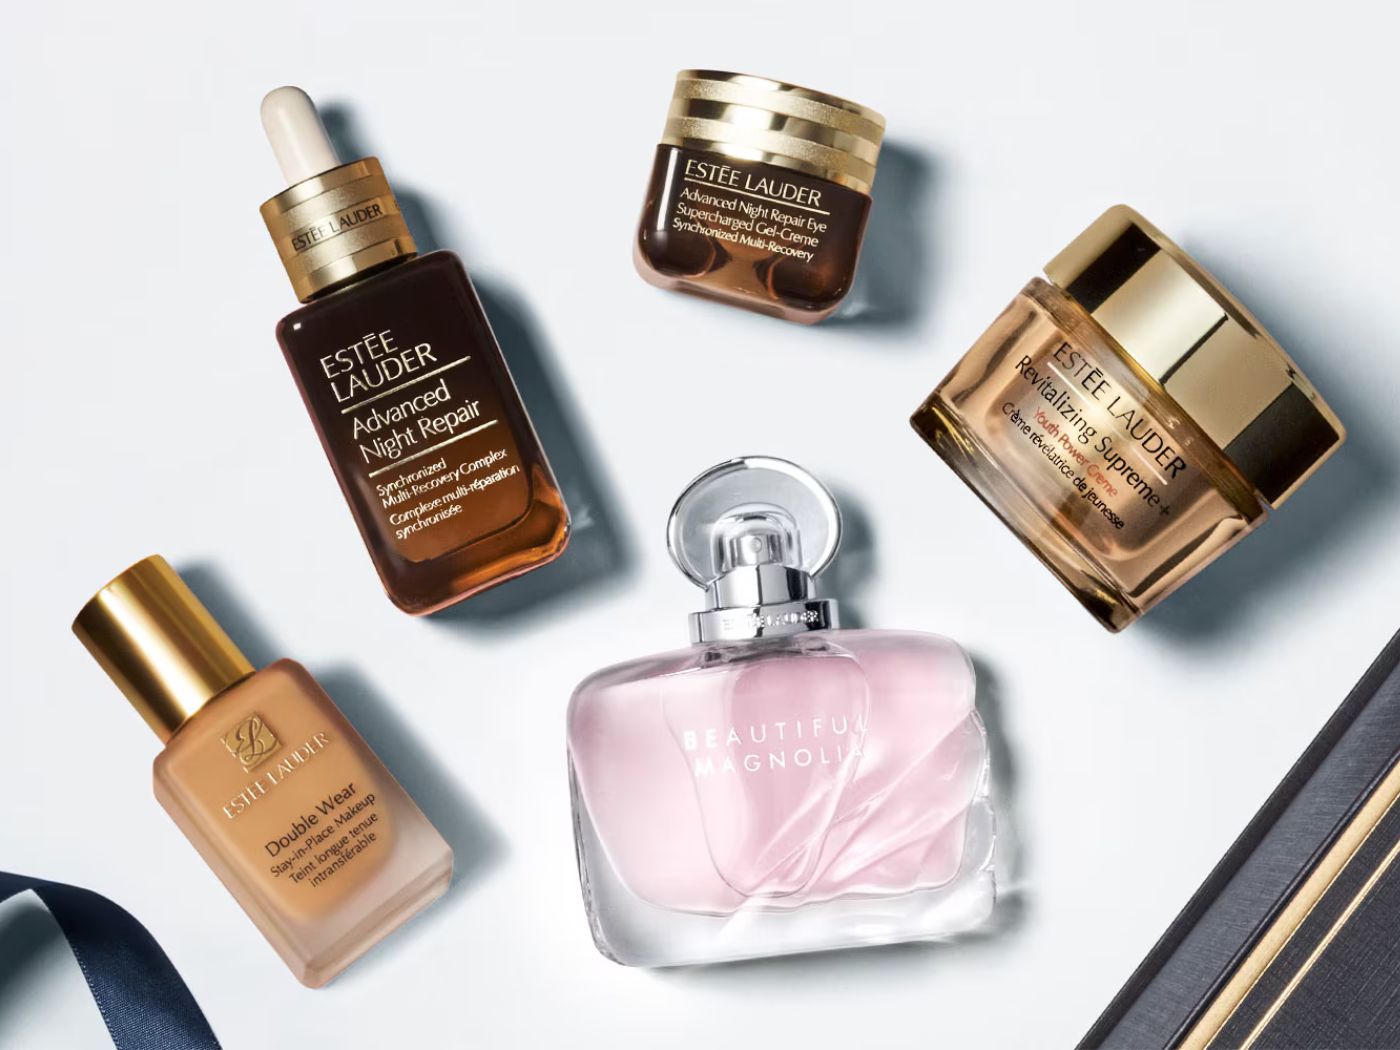 A selection of Estée Lauder skin care, makeup and fragrance products against a white backdrop